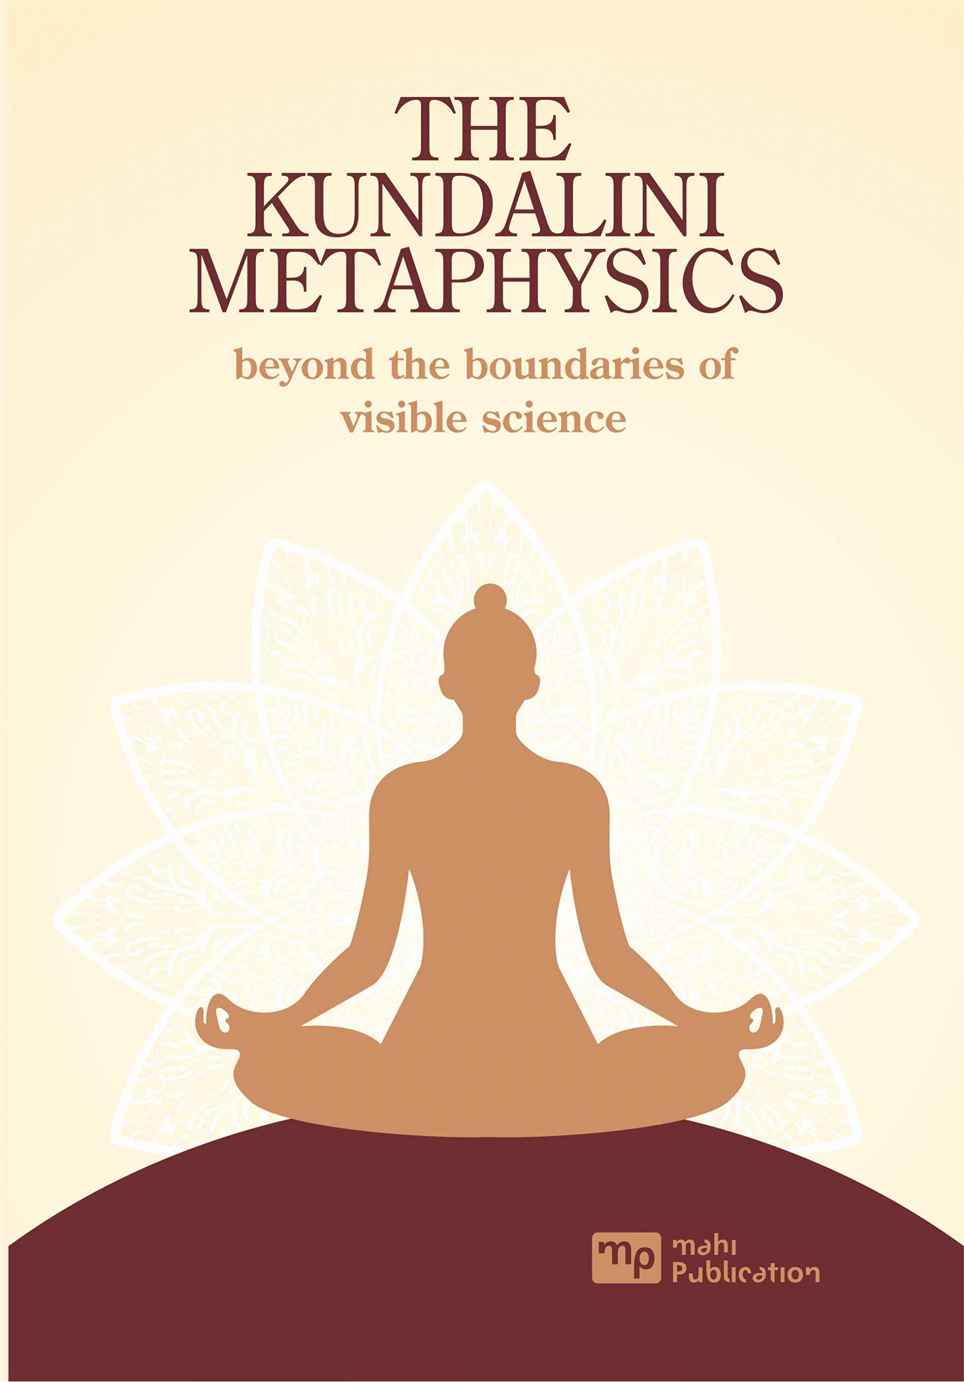 THE KUNDALINI METAPHYSICS beyond the boundaries of visible science